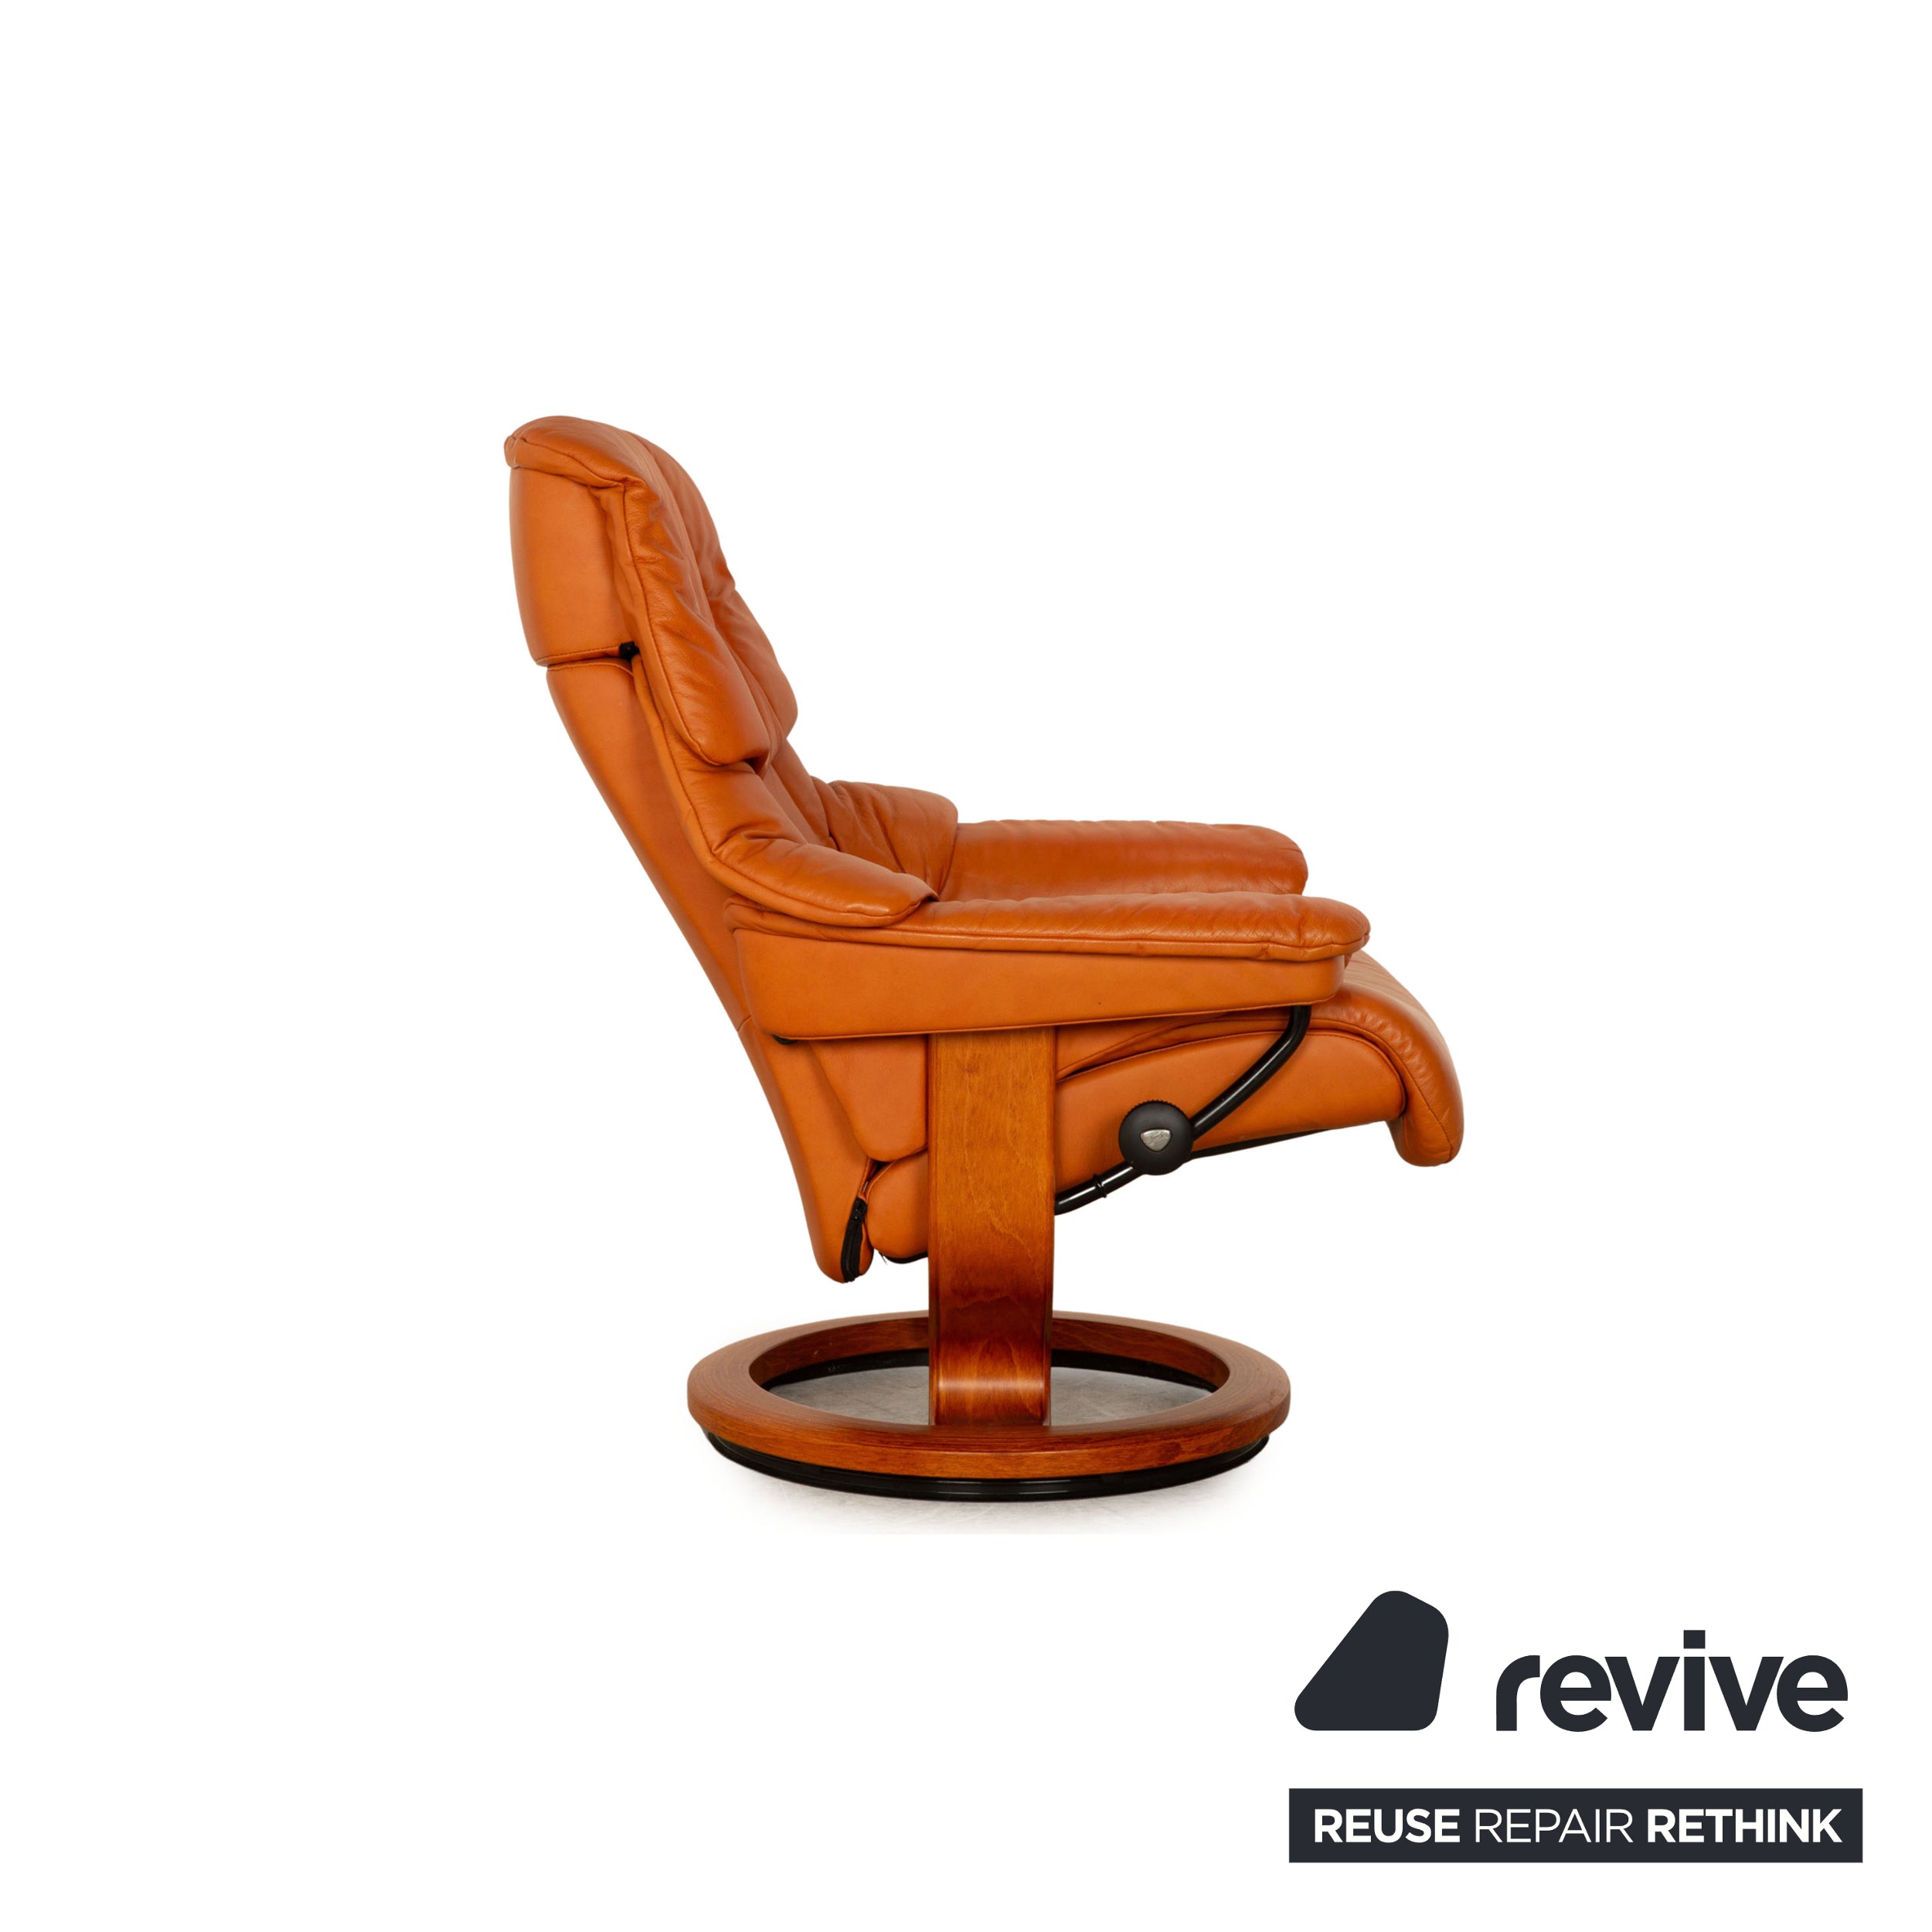 Stressless Reno leather armchair brown orange size M incl. stool manual function relaxation function